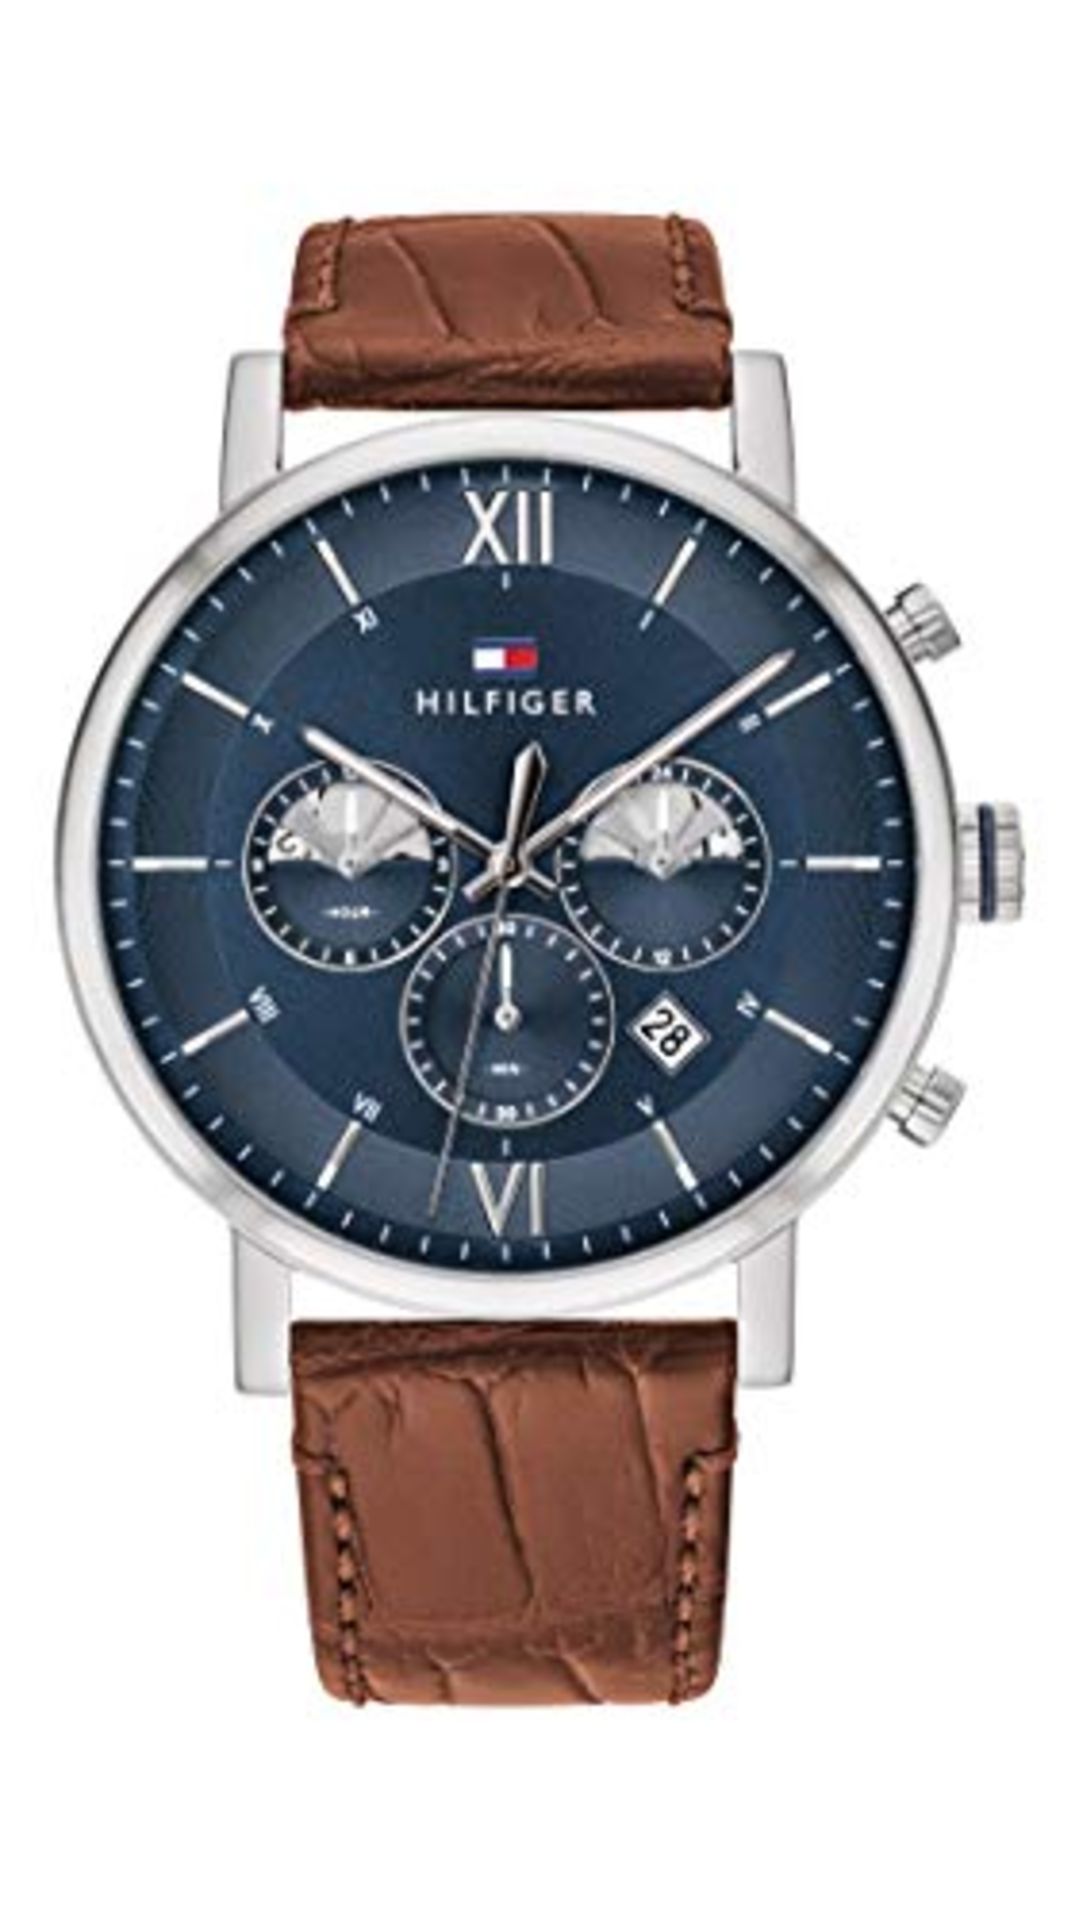 RRP £123.00 Tommy Hilfiger Multi Dial Quartz Watch for Men with Light Brown Leather Strap - 171039